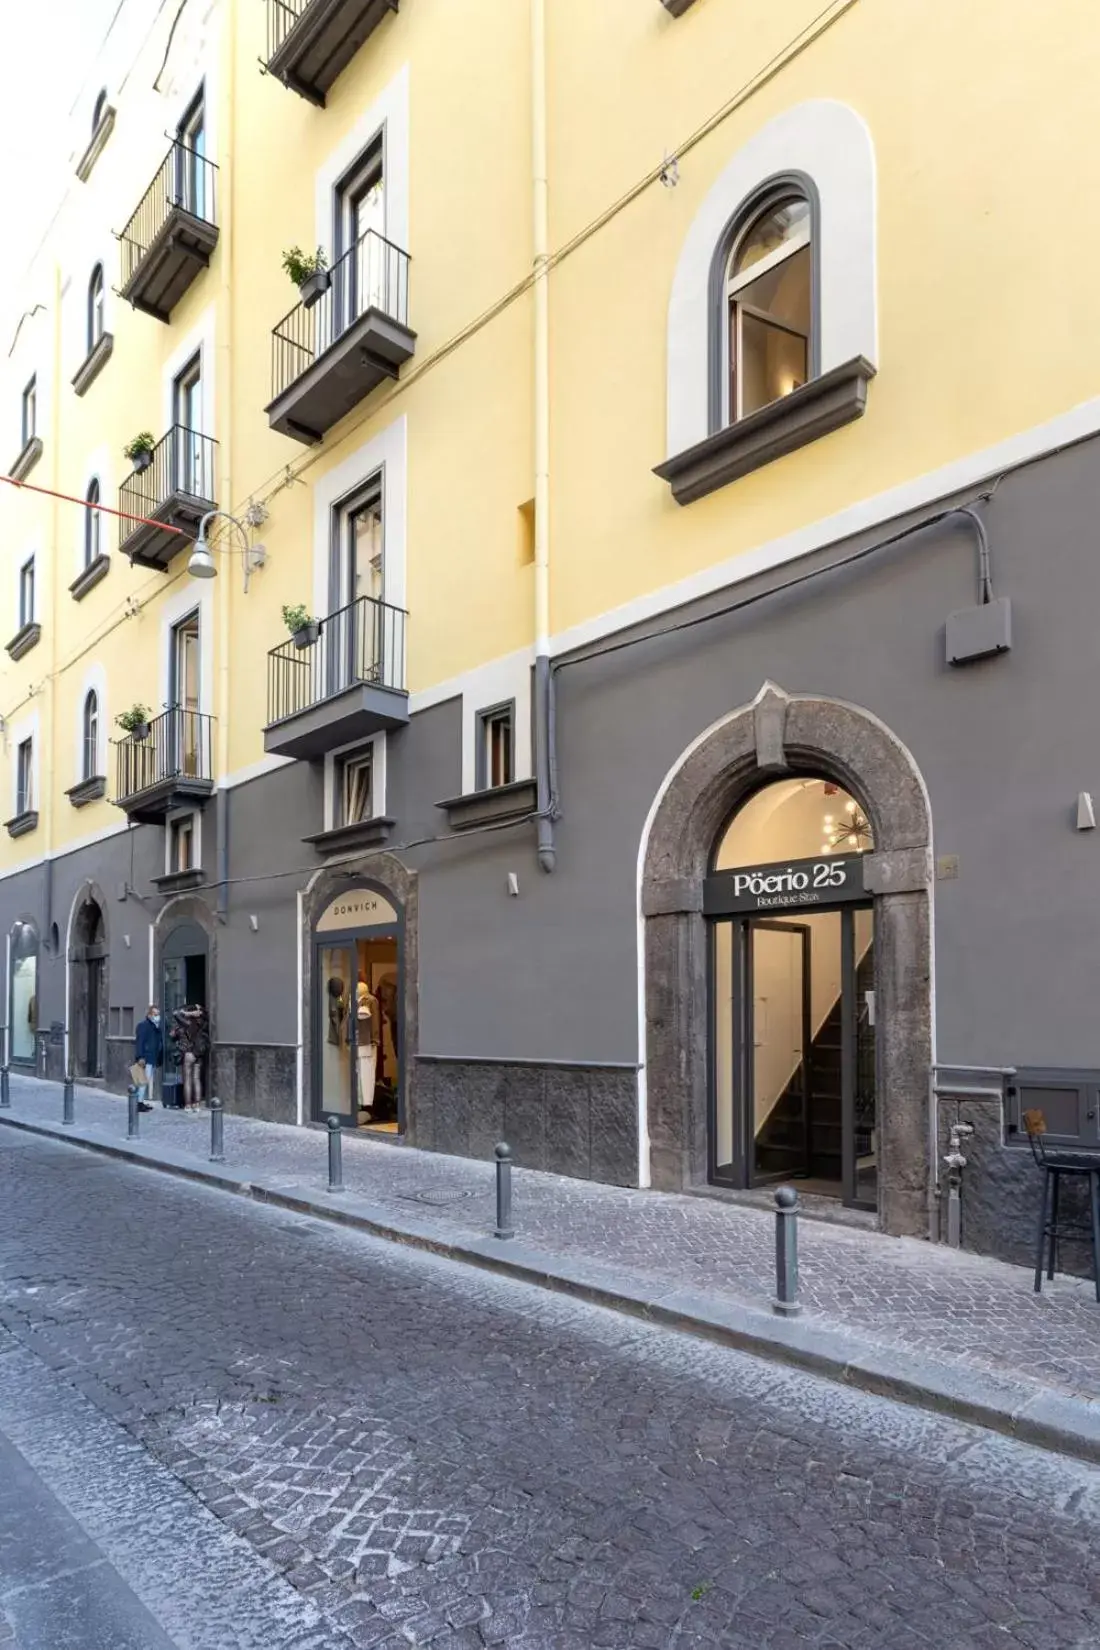 Property Building in Poerio 25 Boutique Stay